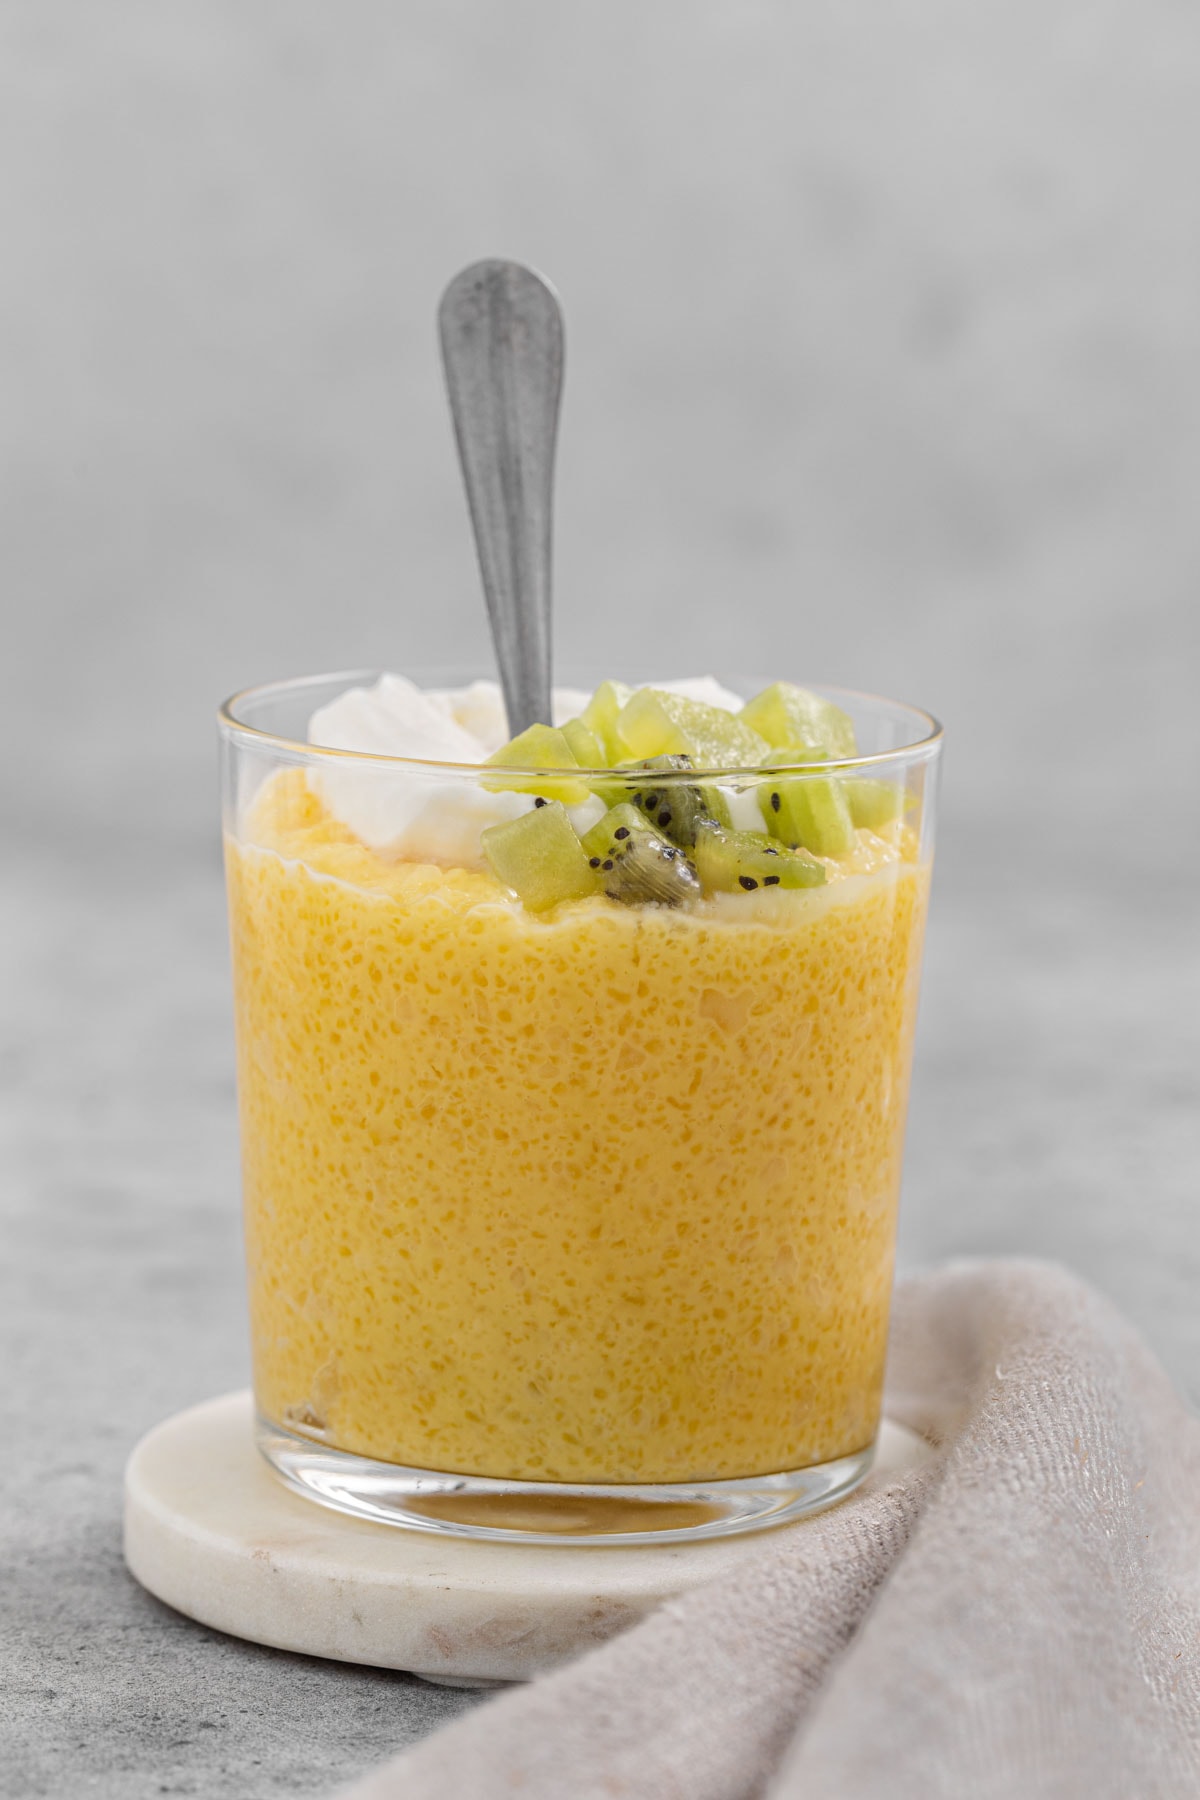 Tapioca pudding in a clear glass topped with whipped cream and kiwi chunks.